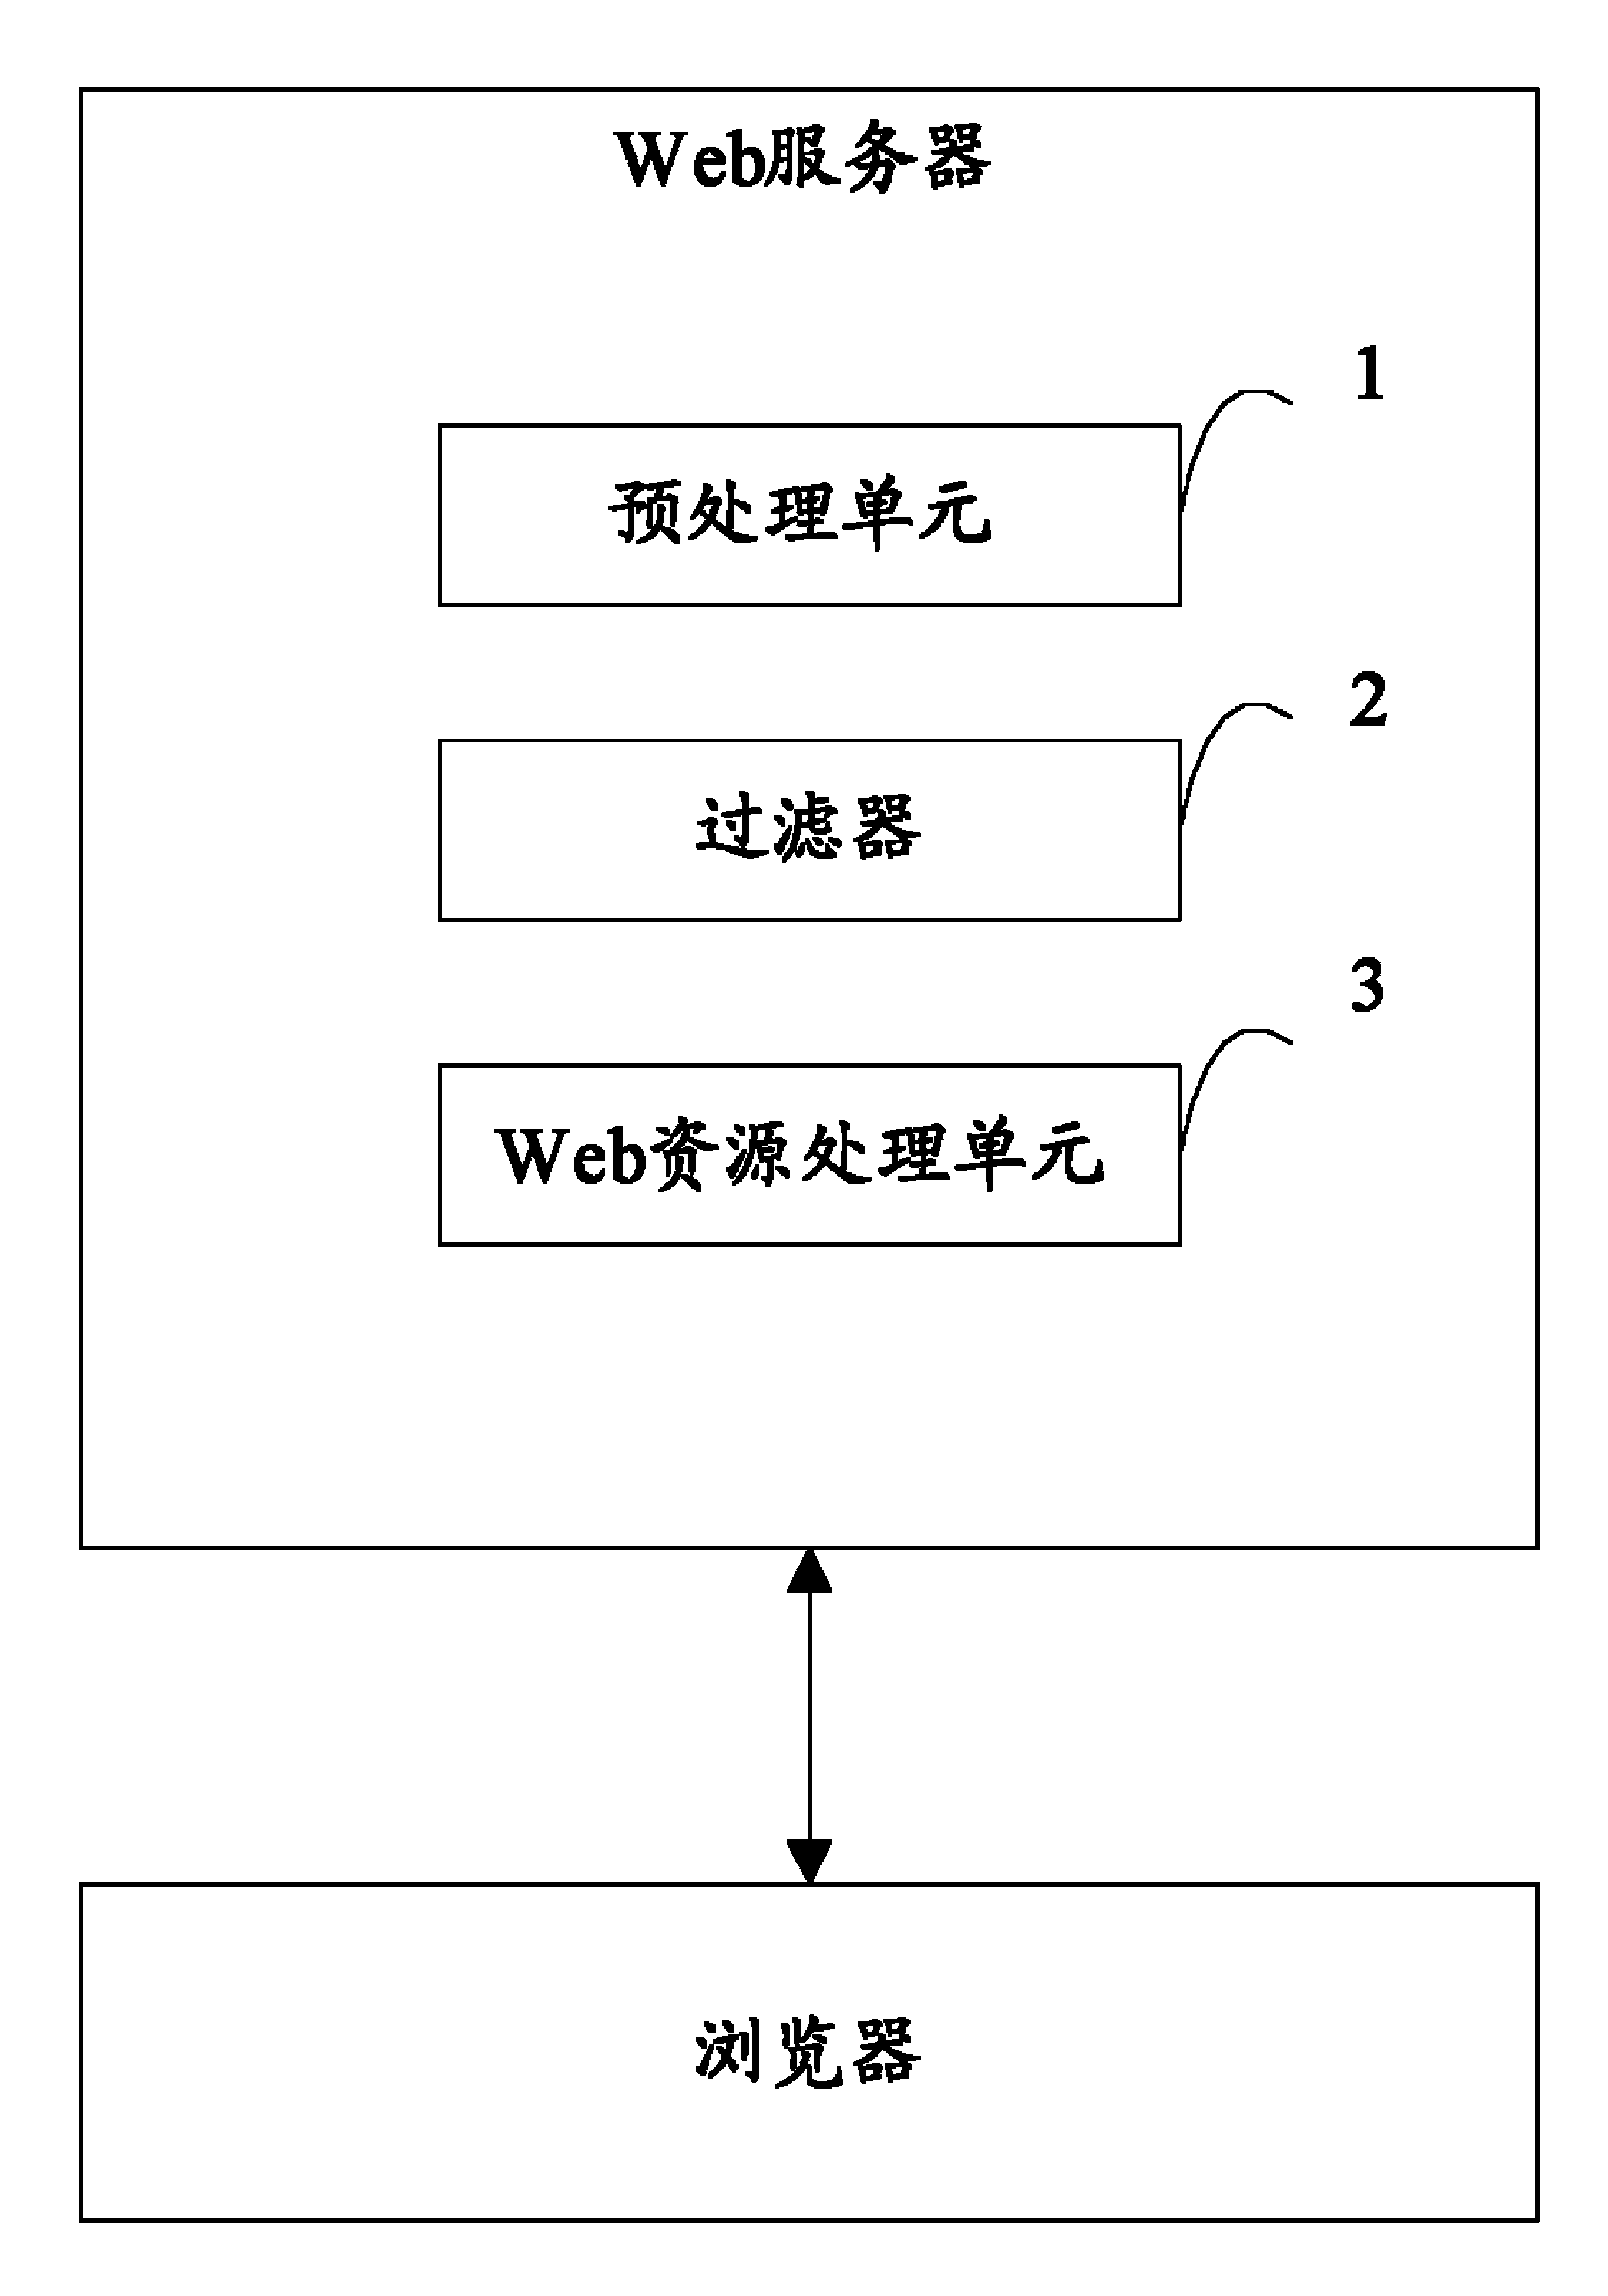 Web server and method for preventing cross-site scripting attack